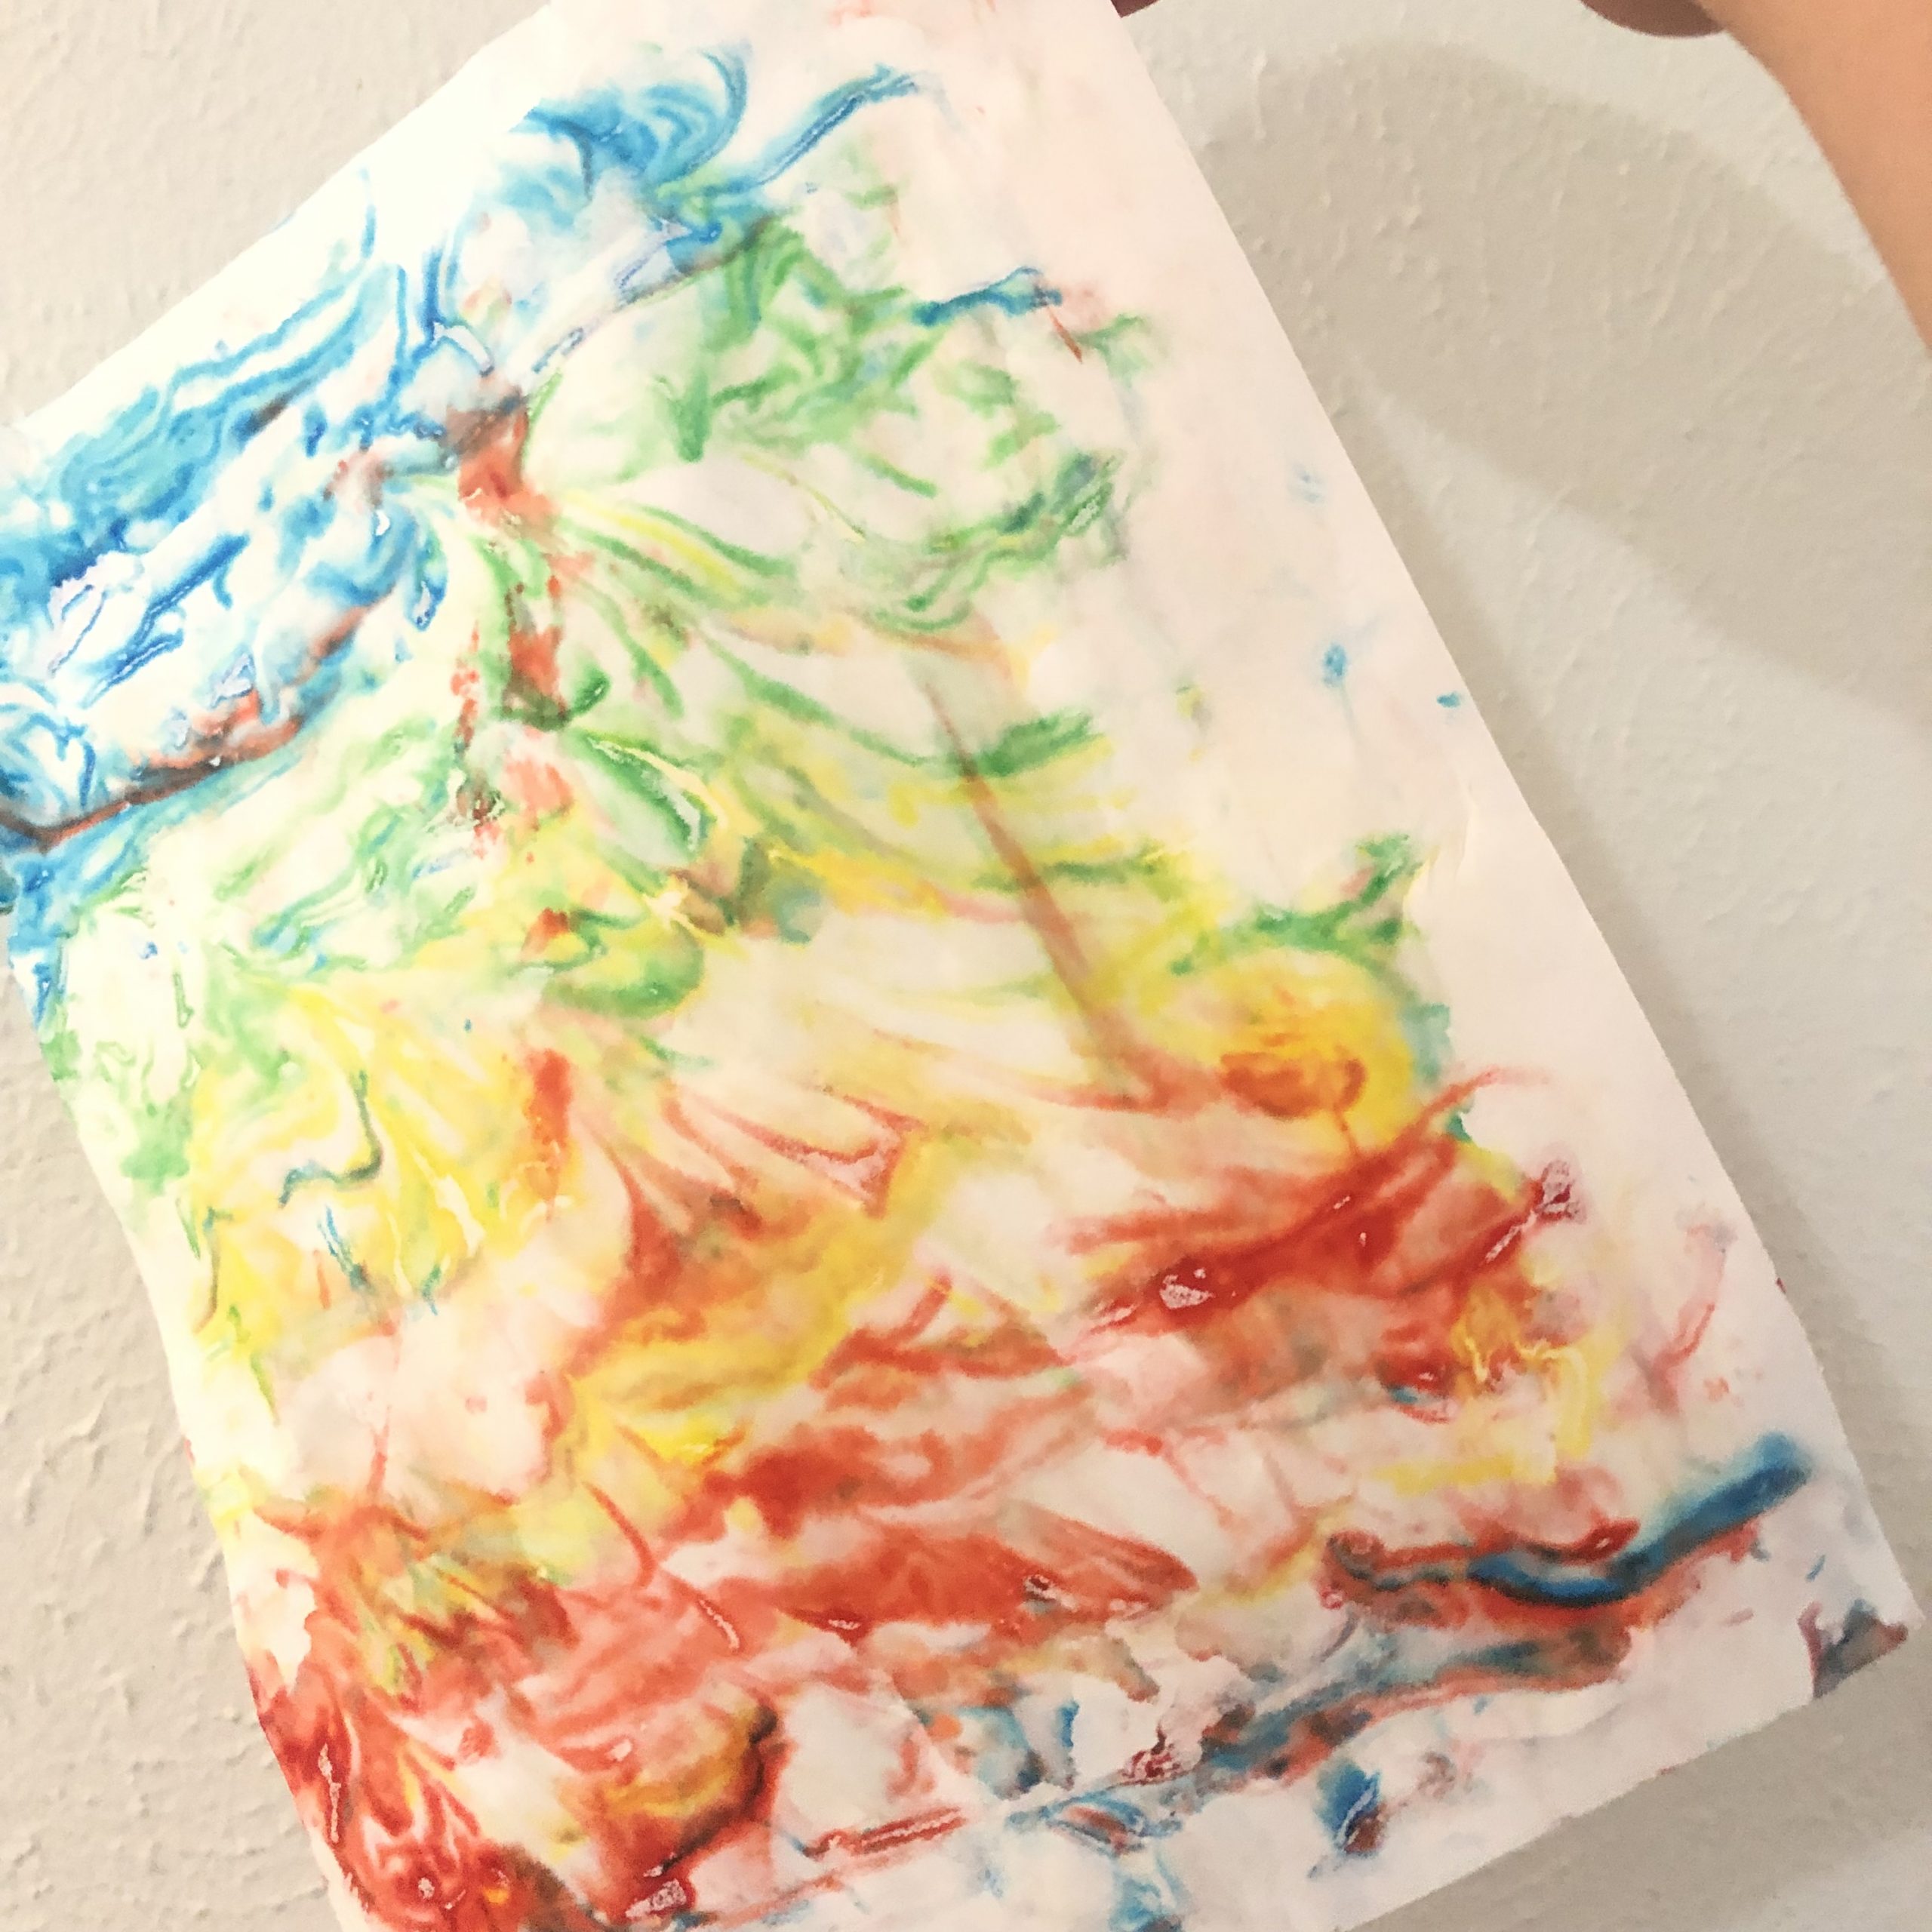 marble shaving cream art, creative art projects for kids